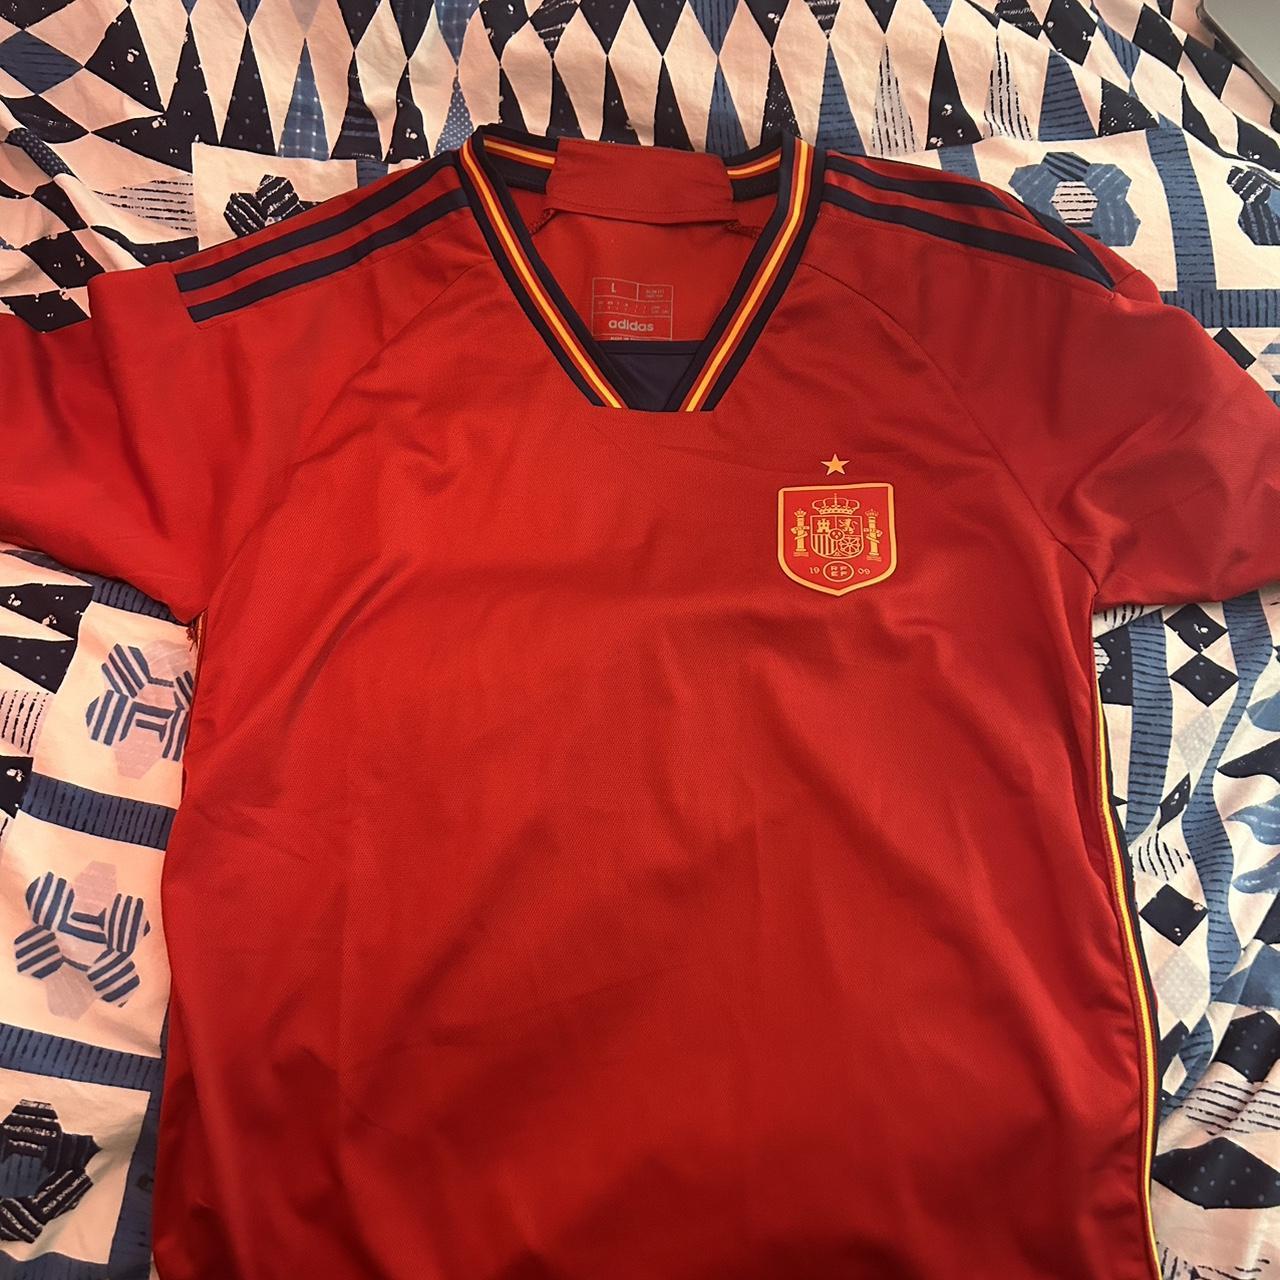 Retro Spain Home Jersey 1998 By Adidas